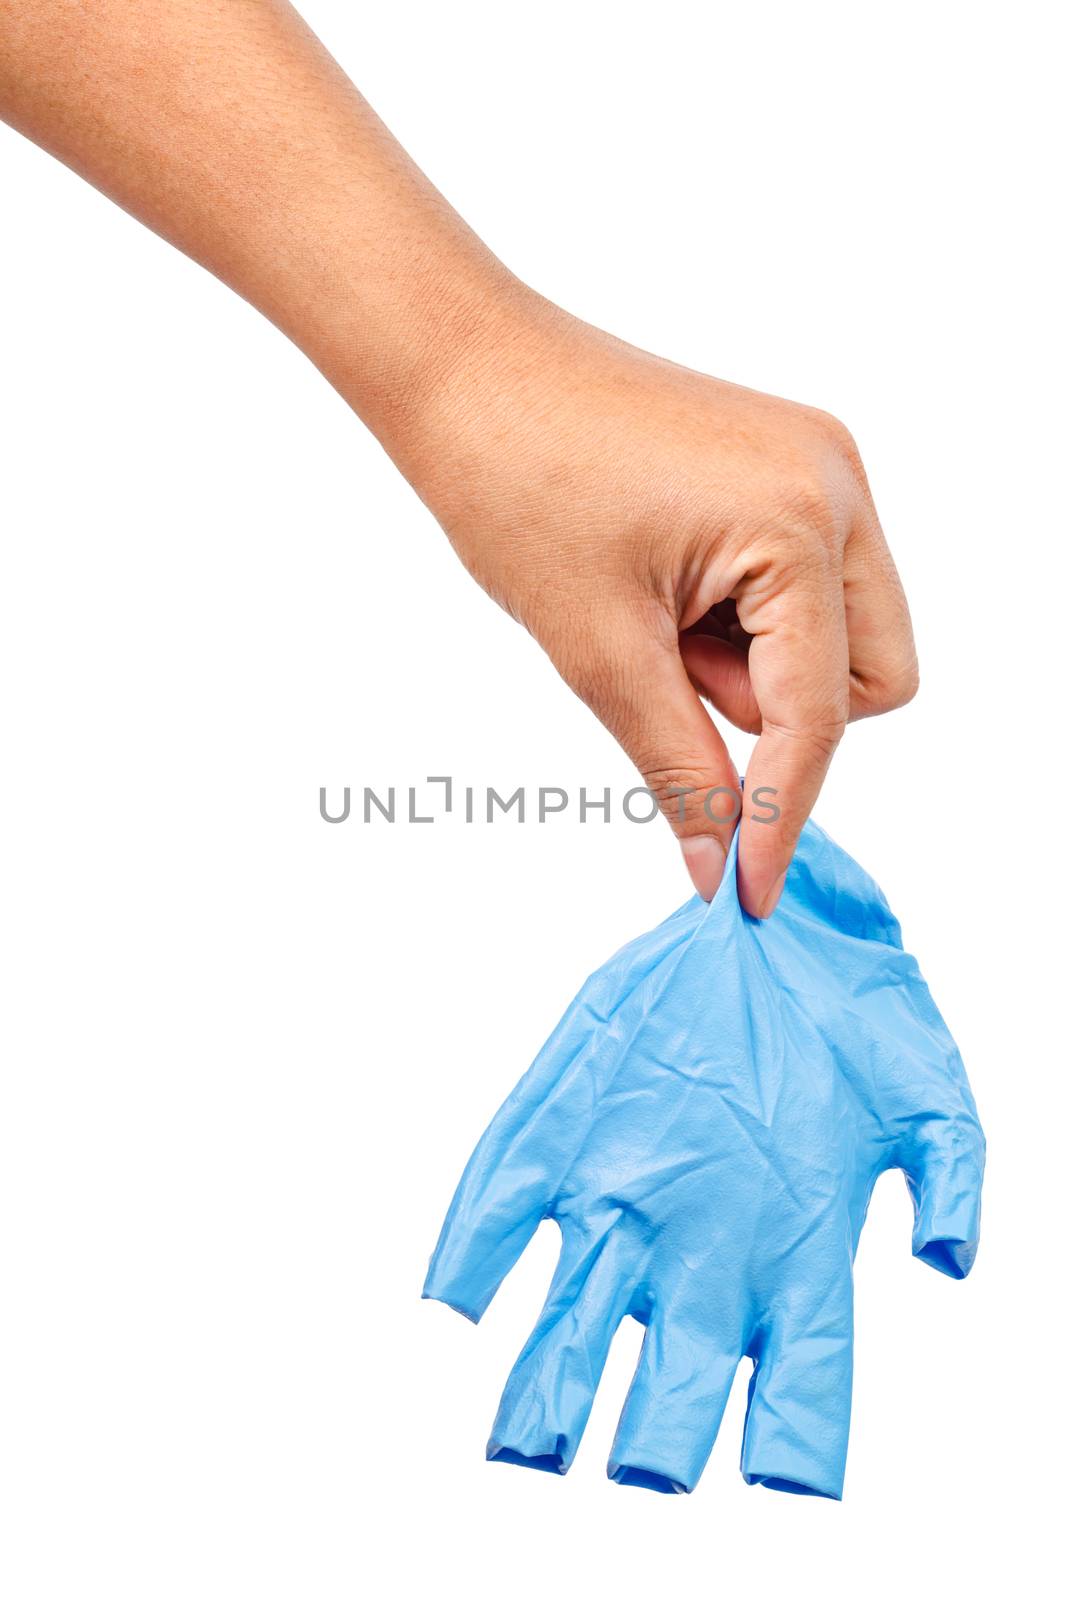 Hand throwing away blue disposable gloves medical, Isolated on white background, Save clipping path. Infection control concept.